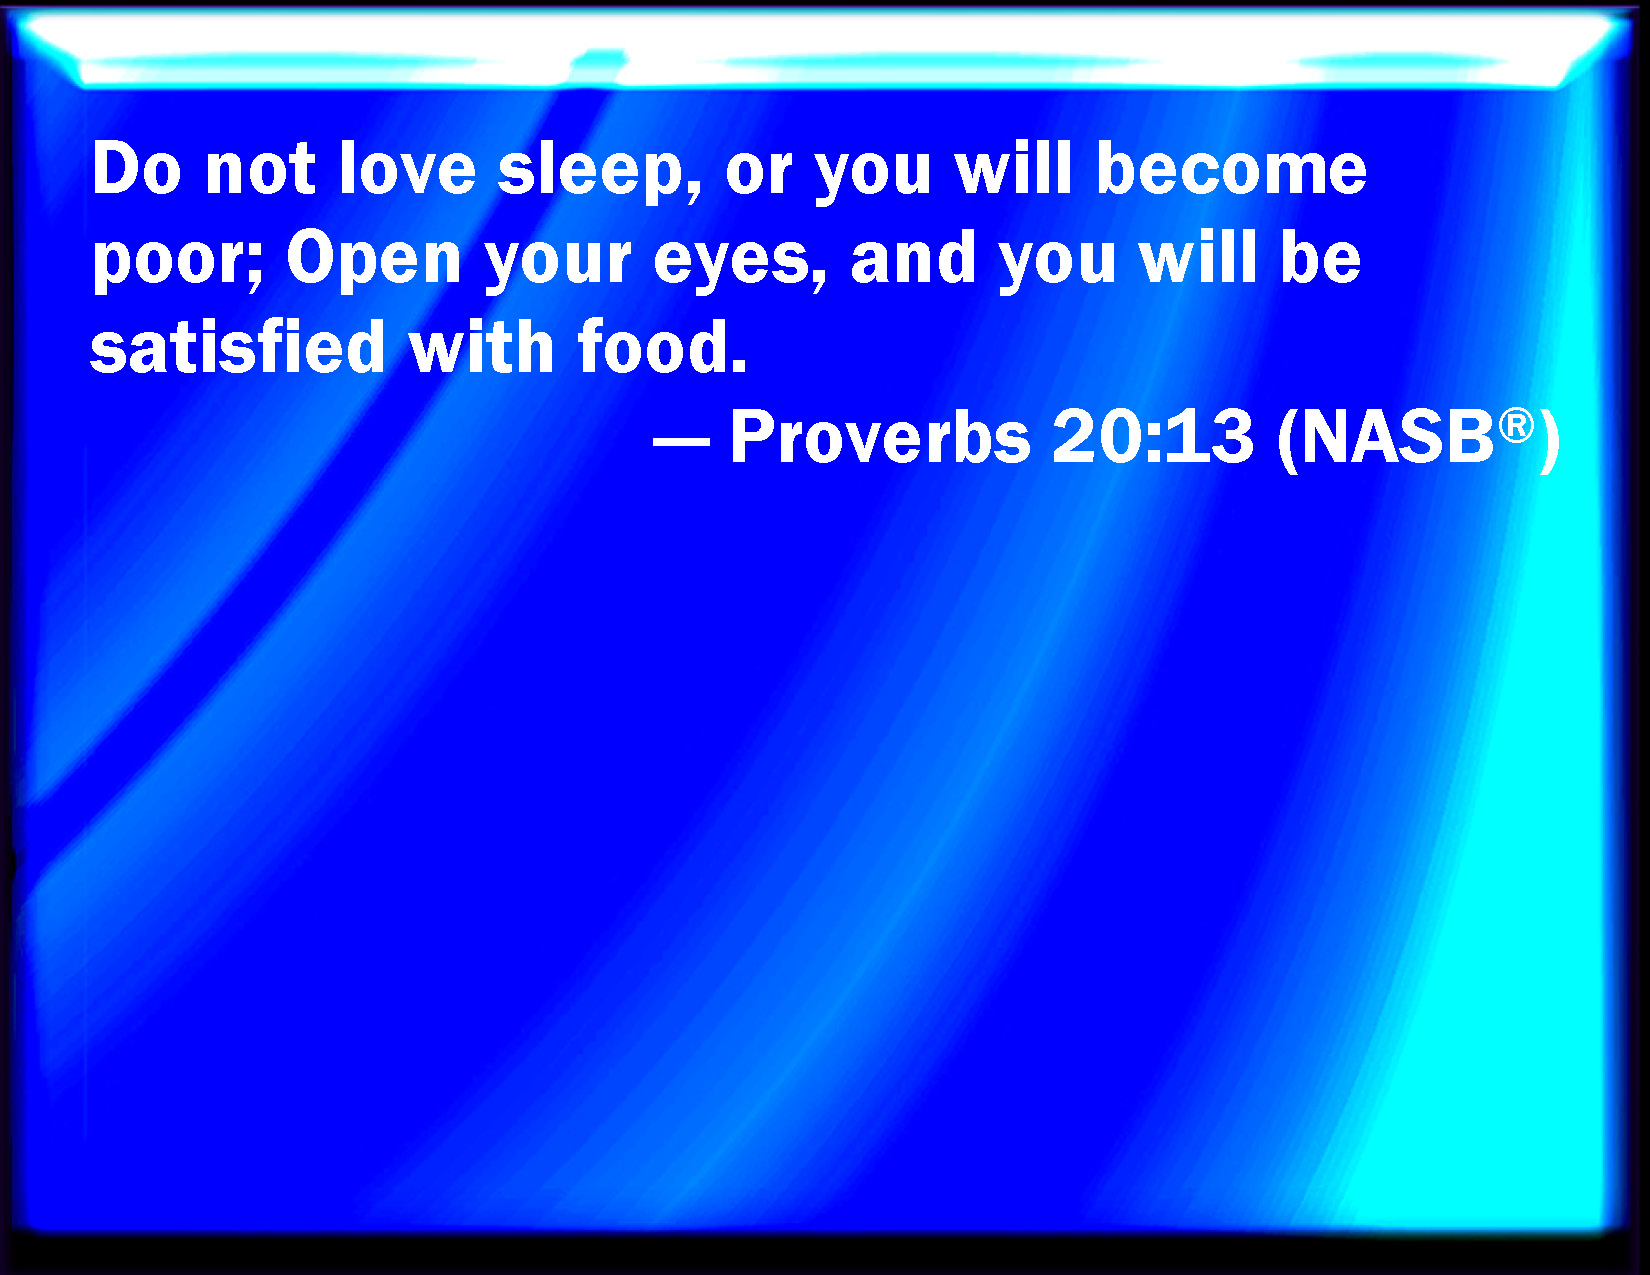 Why does the Bible tell us to not love sleep (Proverbs 20:13)?